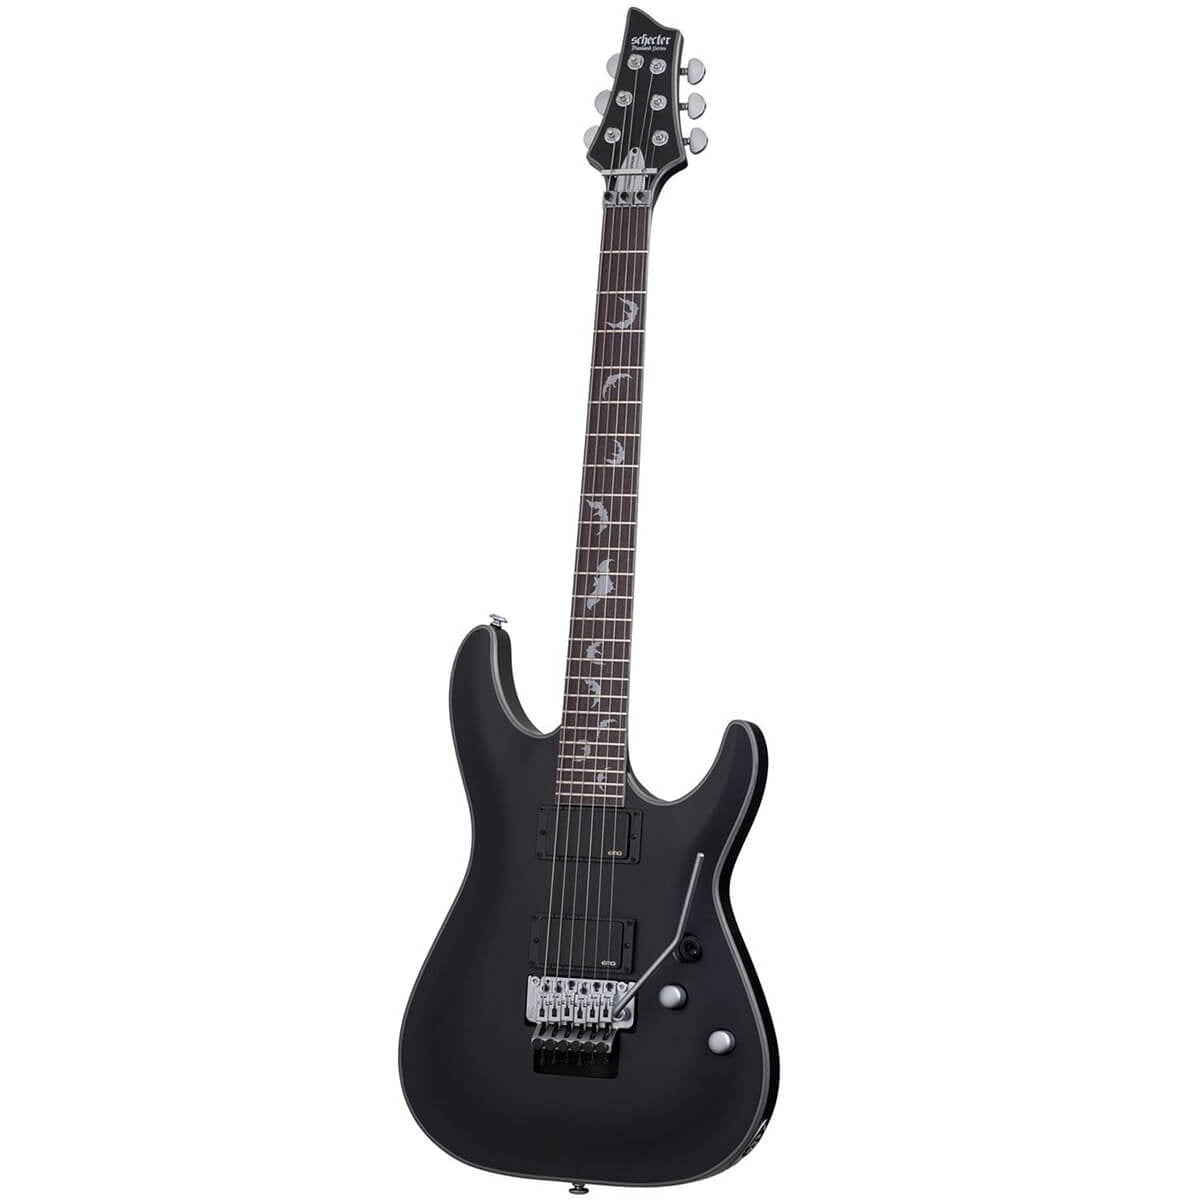 Buy Guitars Online at Low Prices at Ubuy India